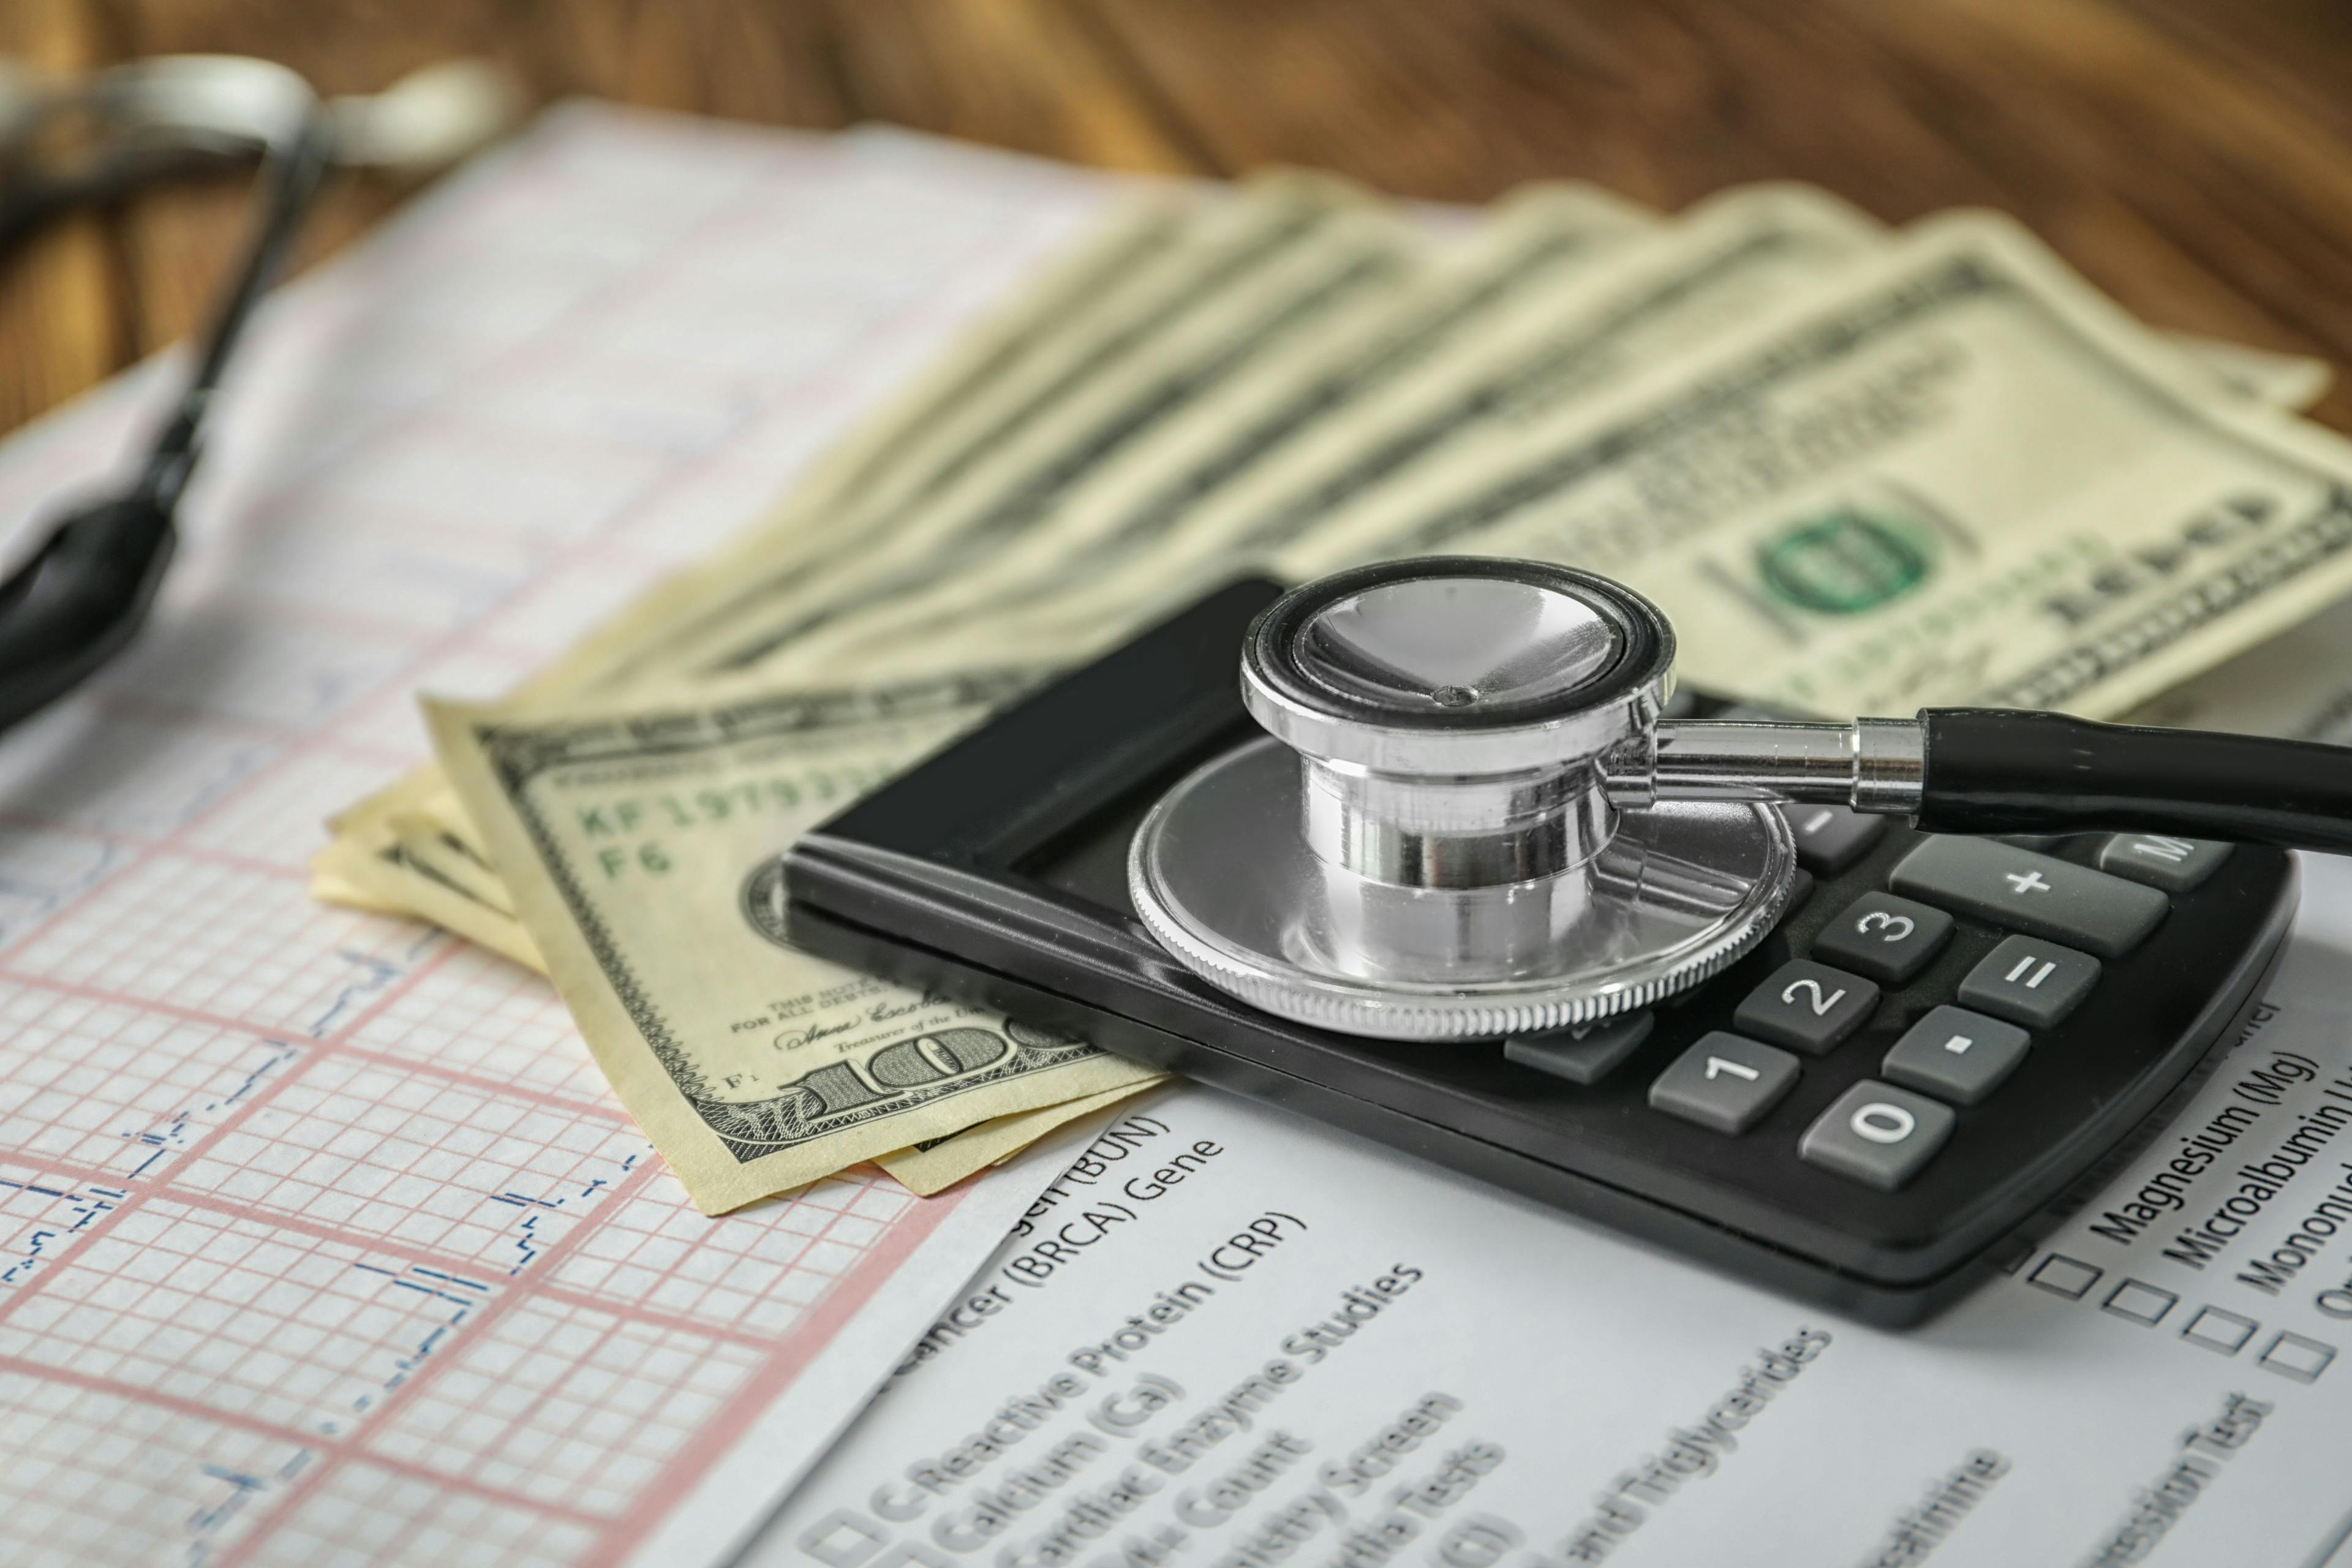 Can Providers Become Payers? It Can Work If Health Systems Keep These Points in Mind